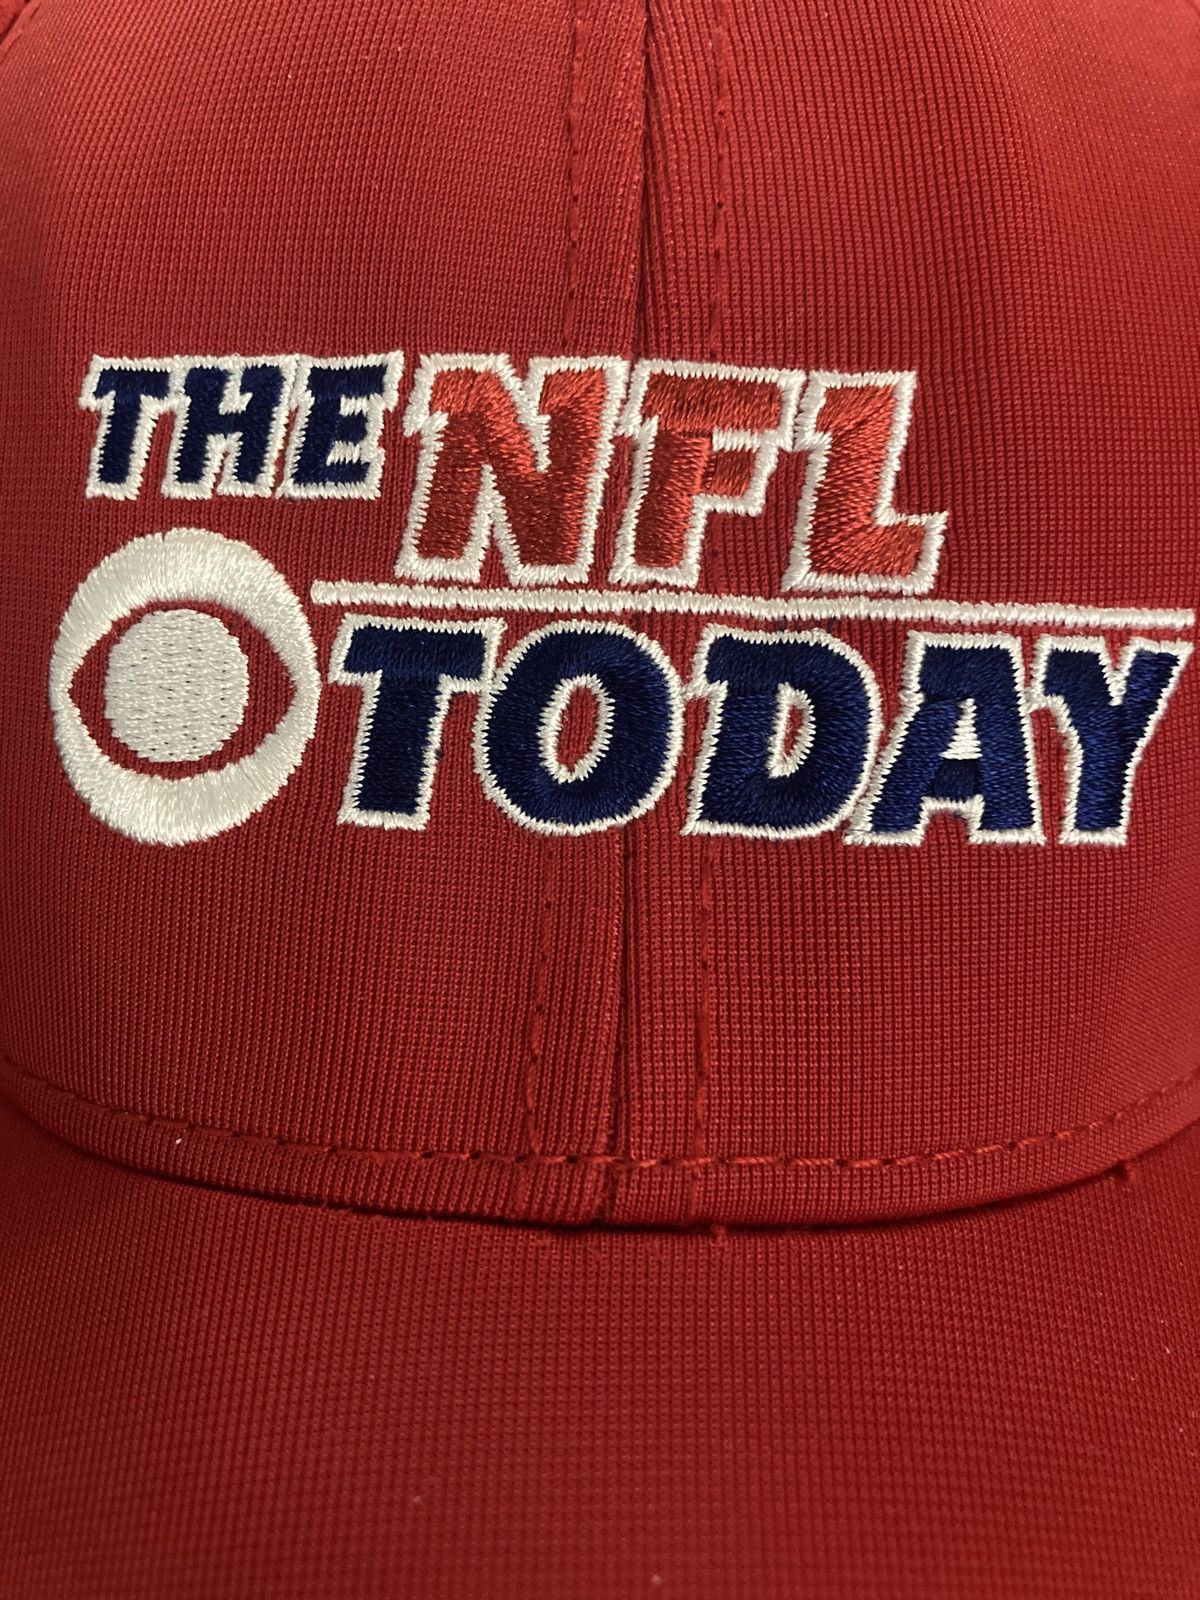 NFL The NFL Today CBS TV Show Hat Cap Nu-Fit Football Trucker 🏈🏈 Size ONE SIZE - 2 Preview